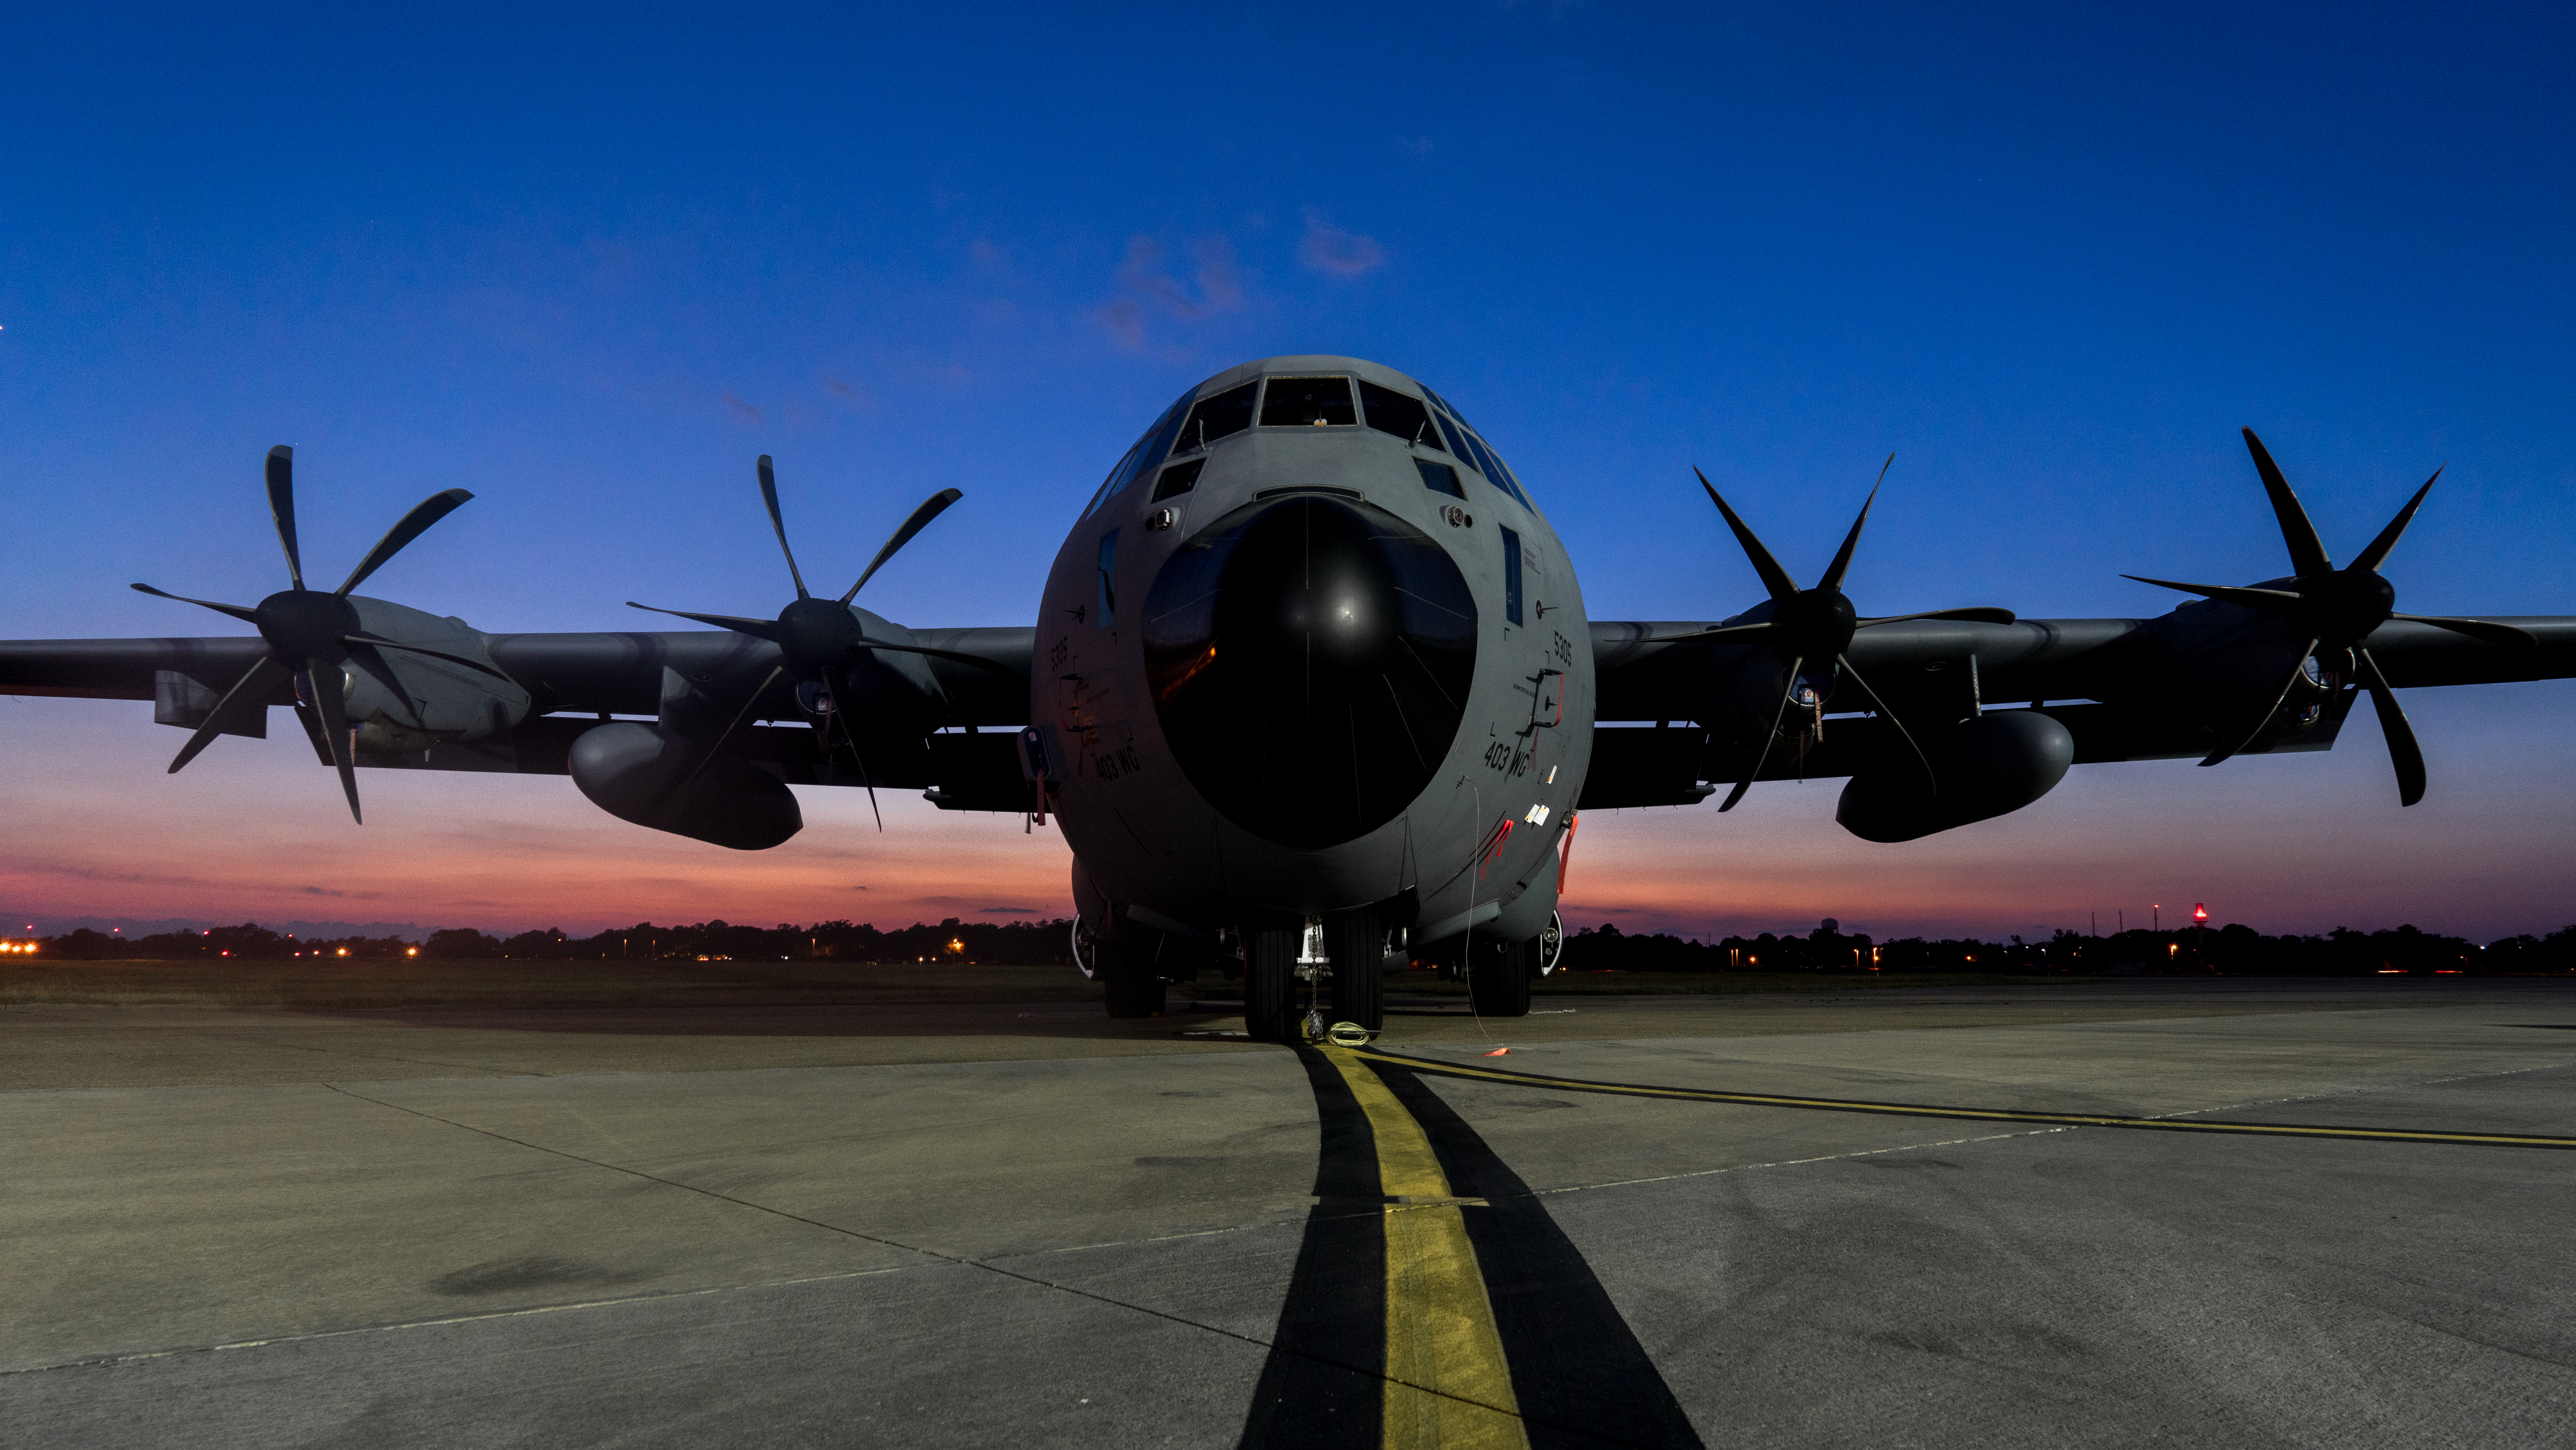 A C-130J is parked on the flightline with a sunset in the background.